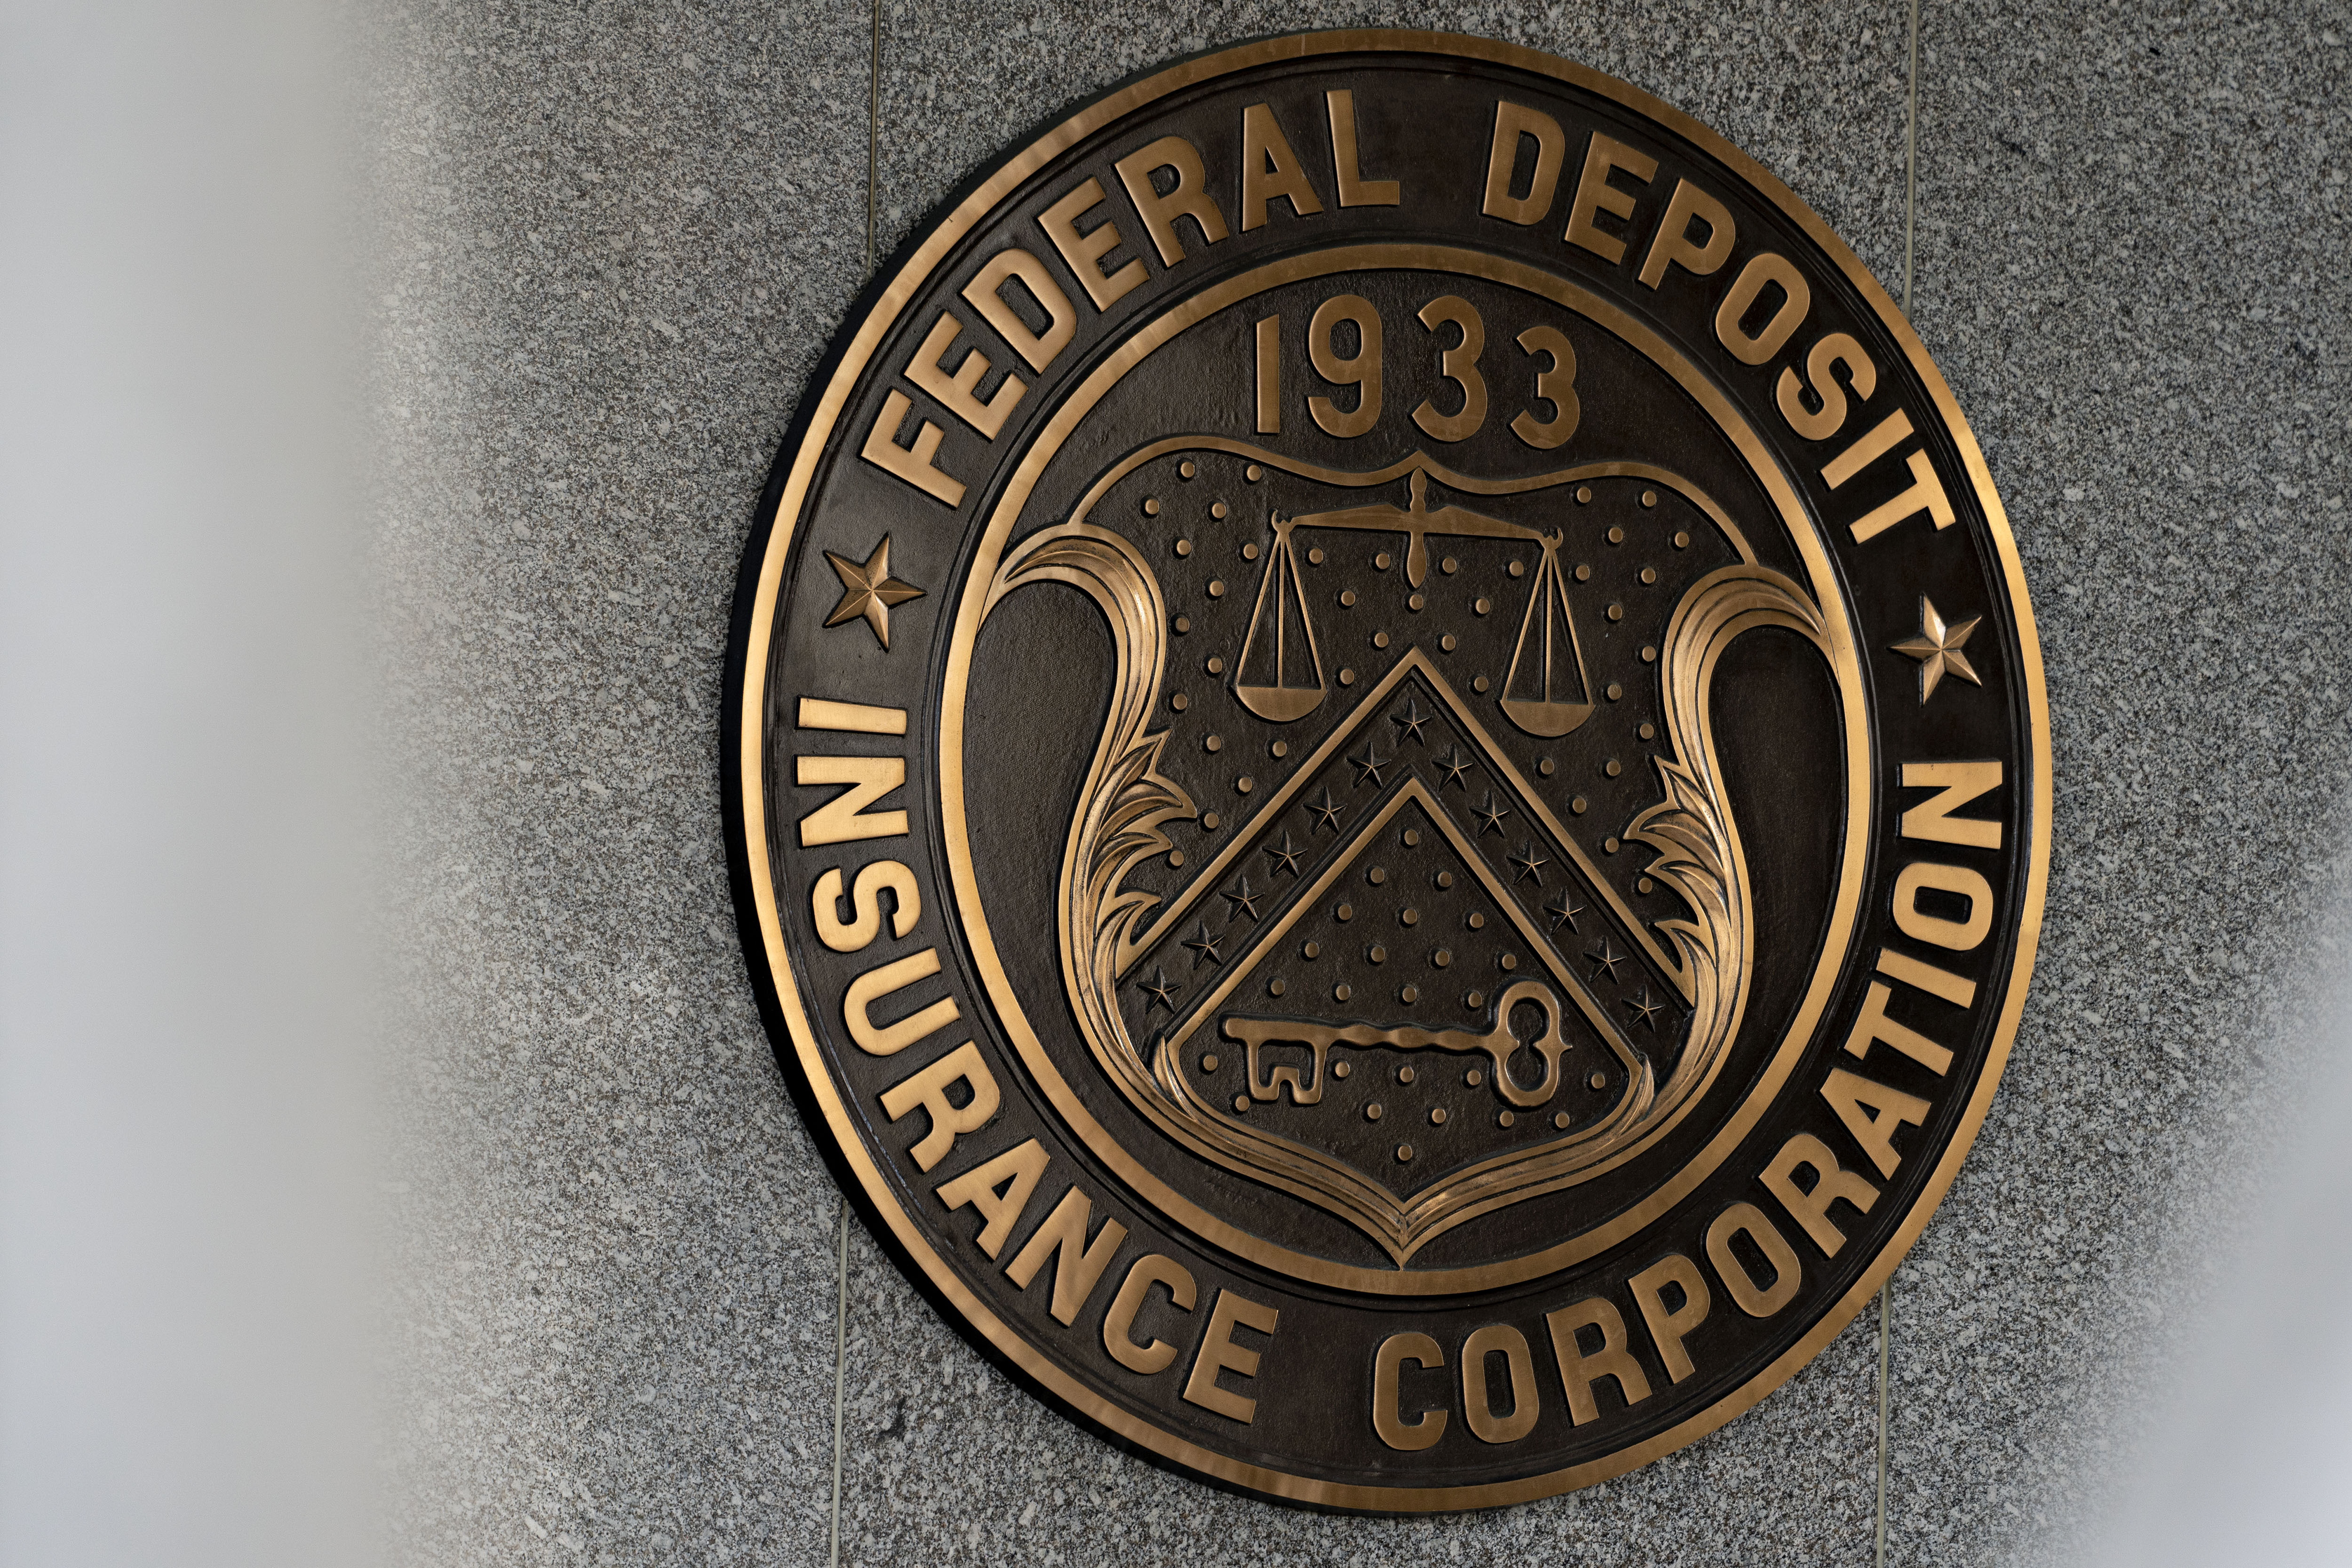 FDIC Still Unclear if USDF Stablecoin Is FDIC-Insured